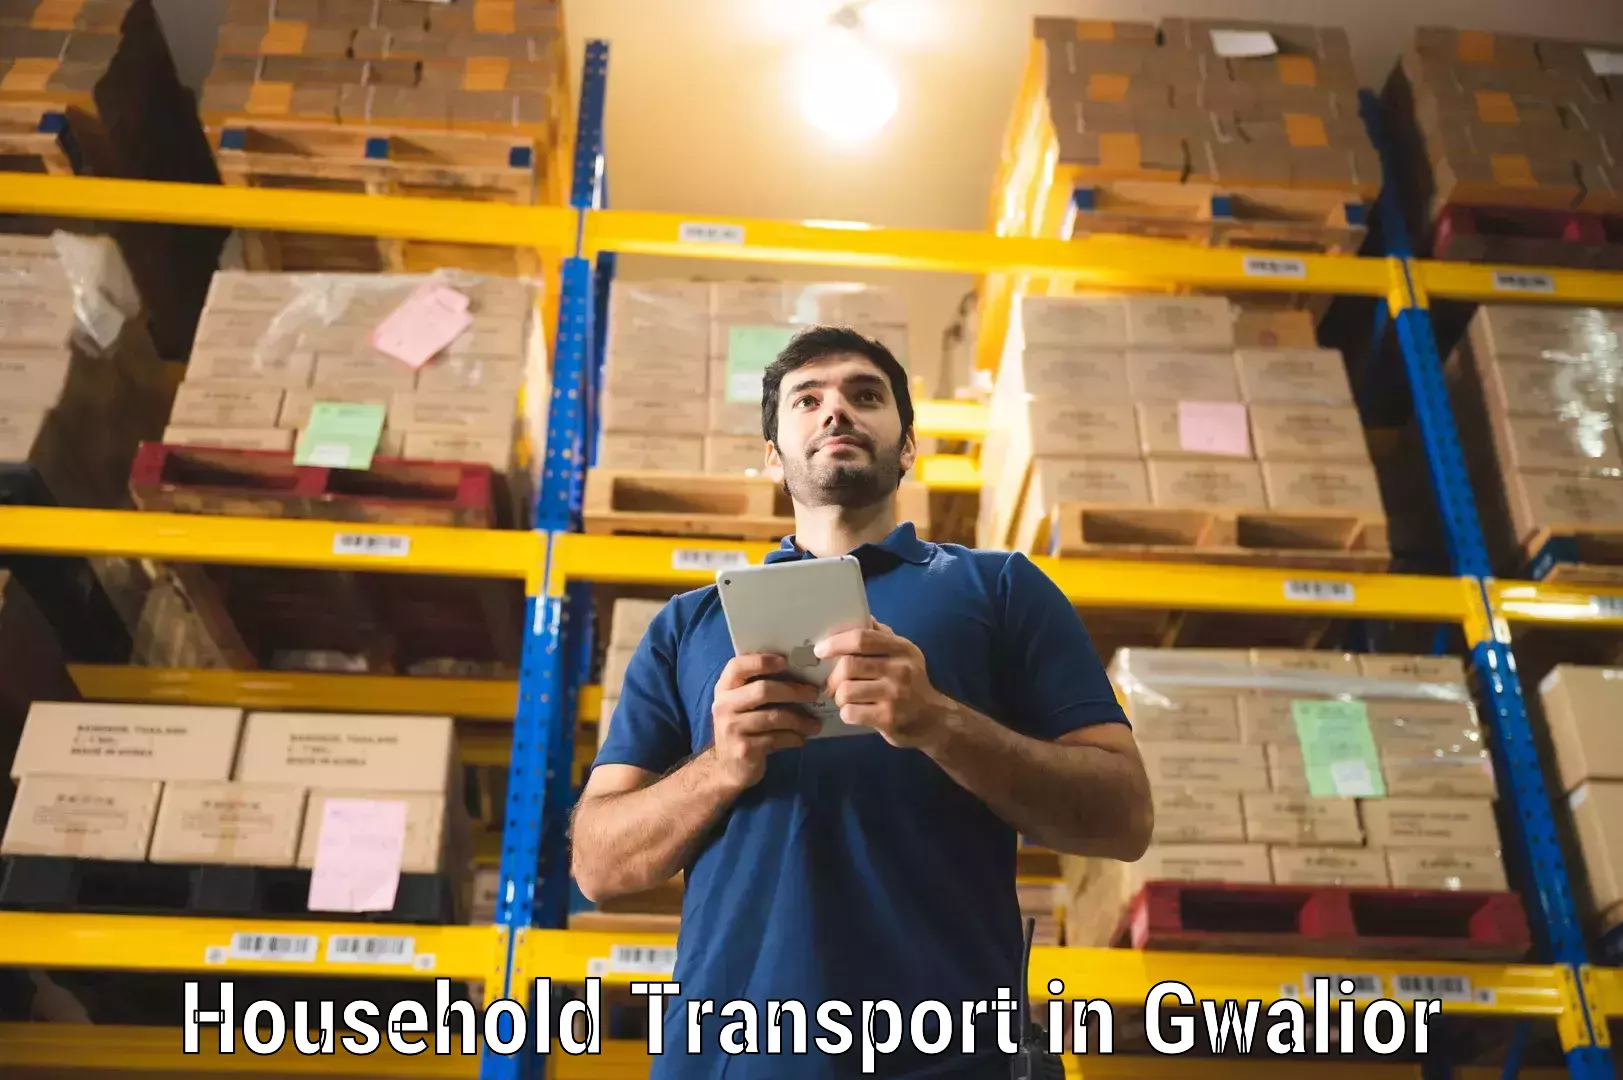 Furniture transport and logistics in Gwalior